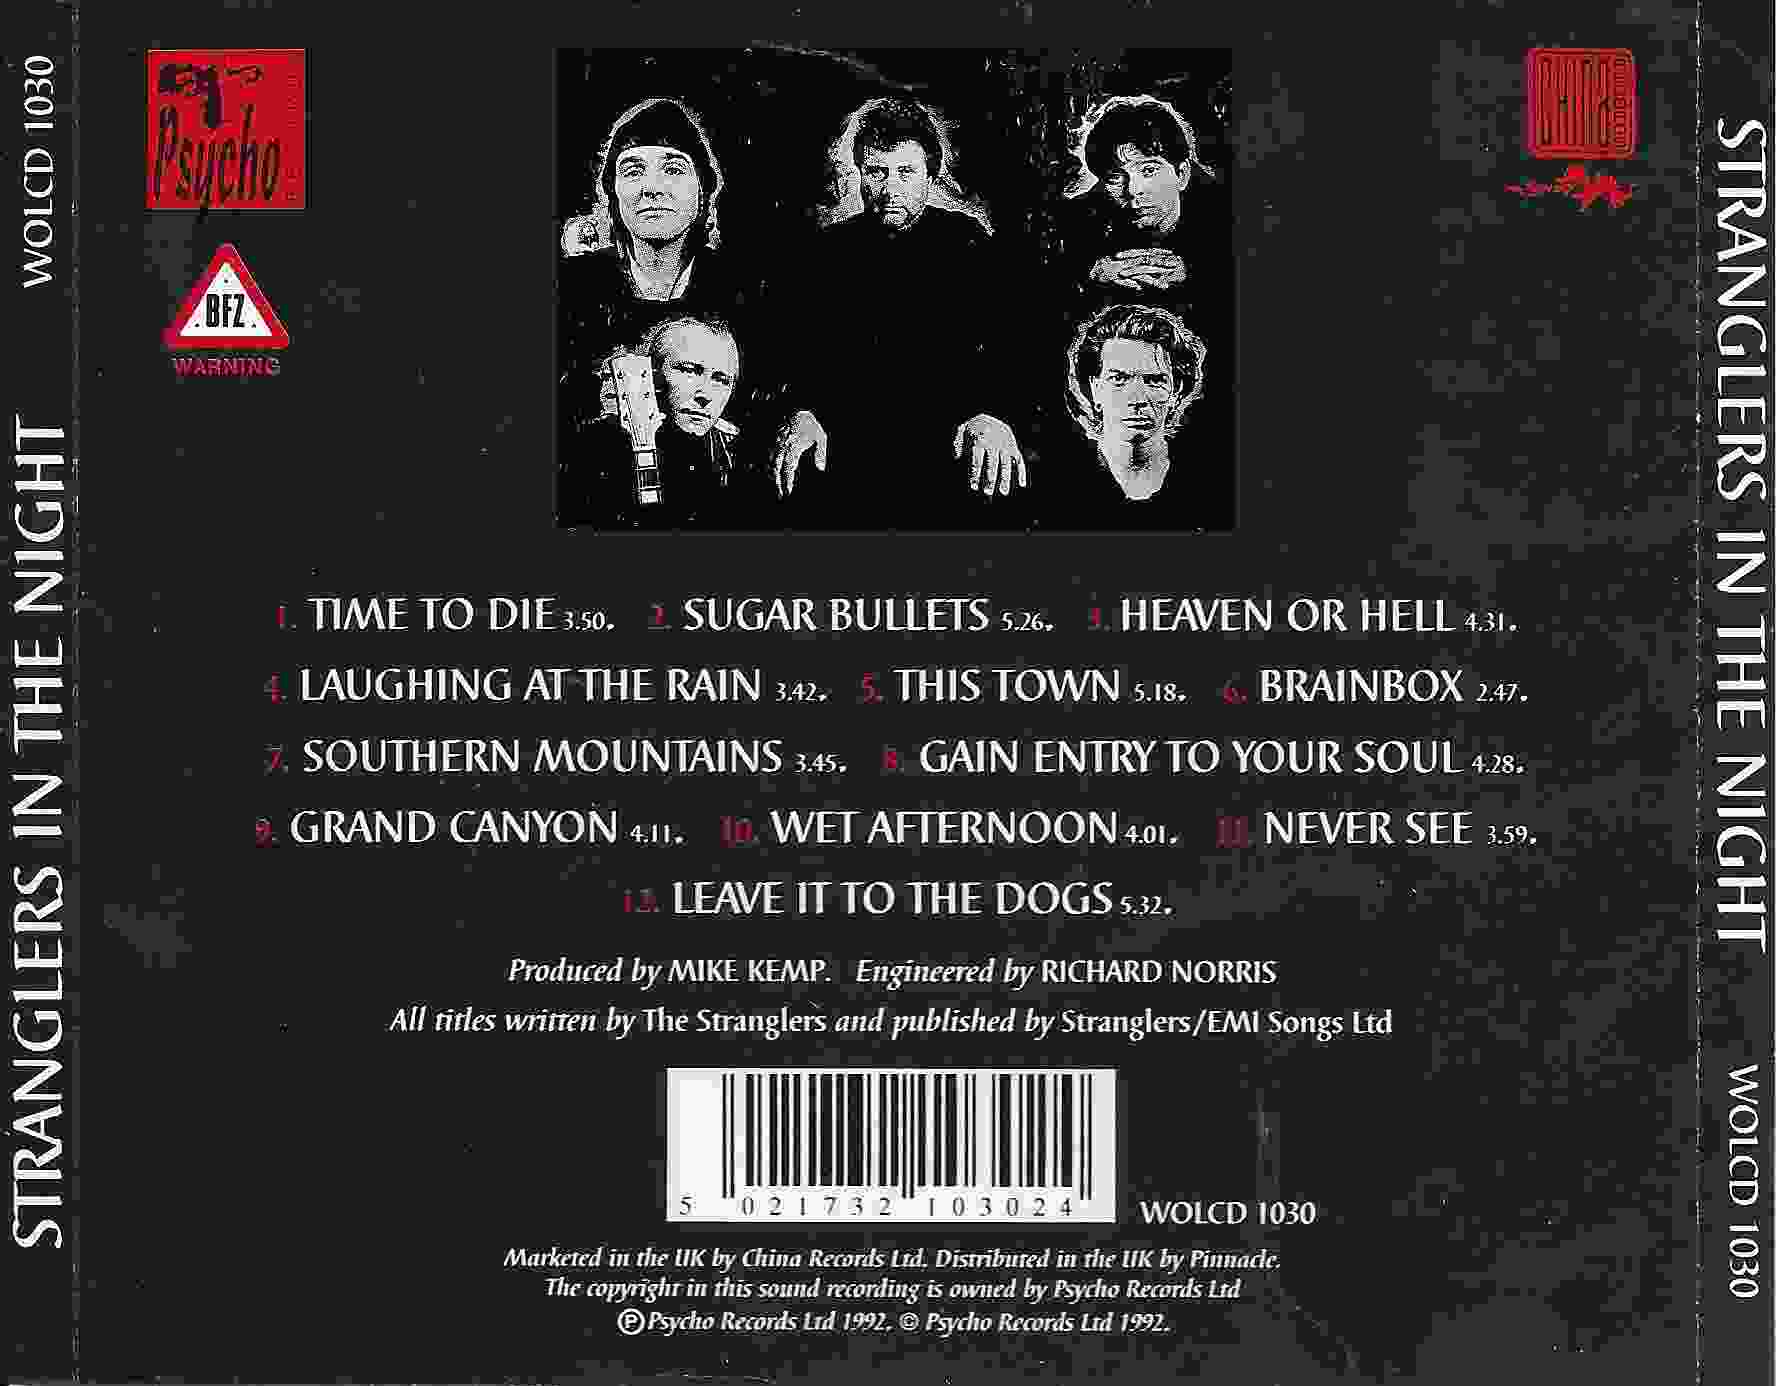 Back cover of WOLCD 1030